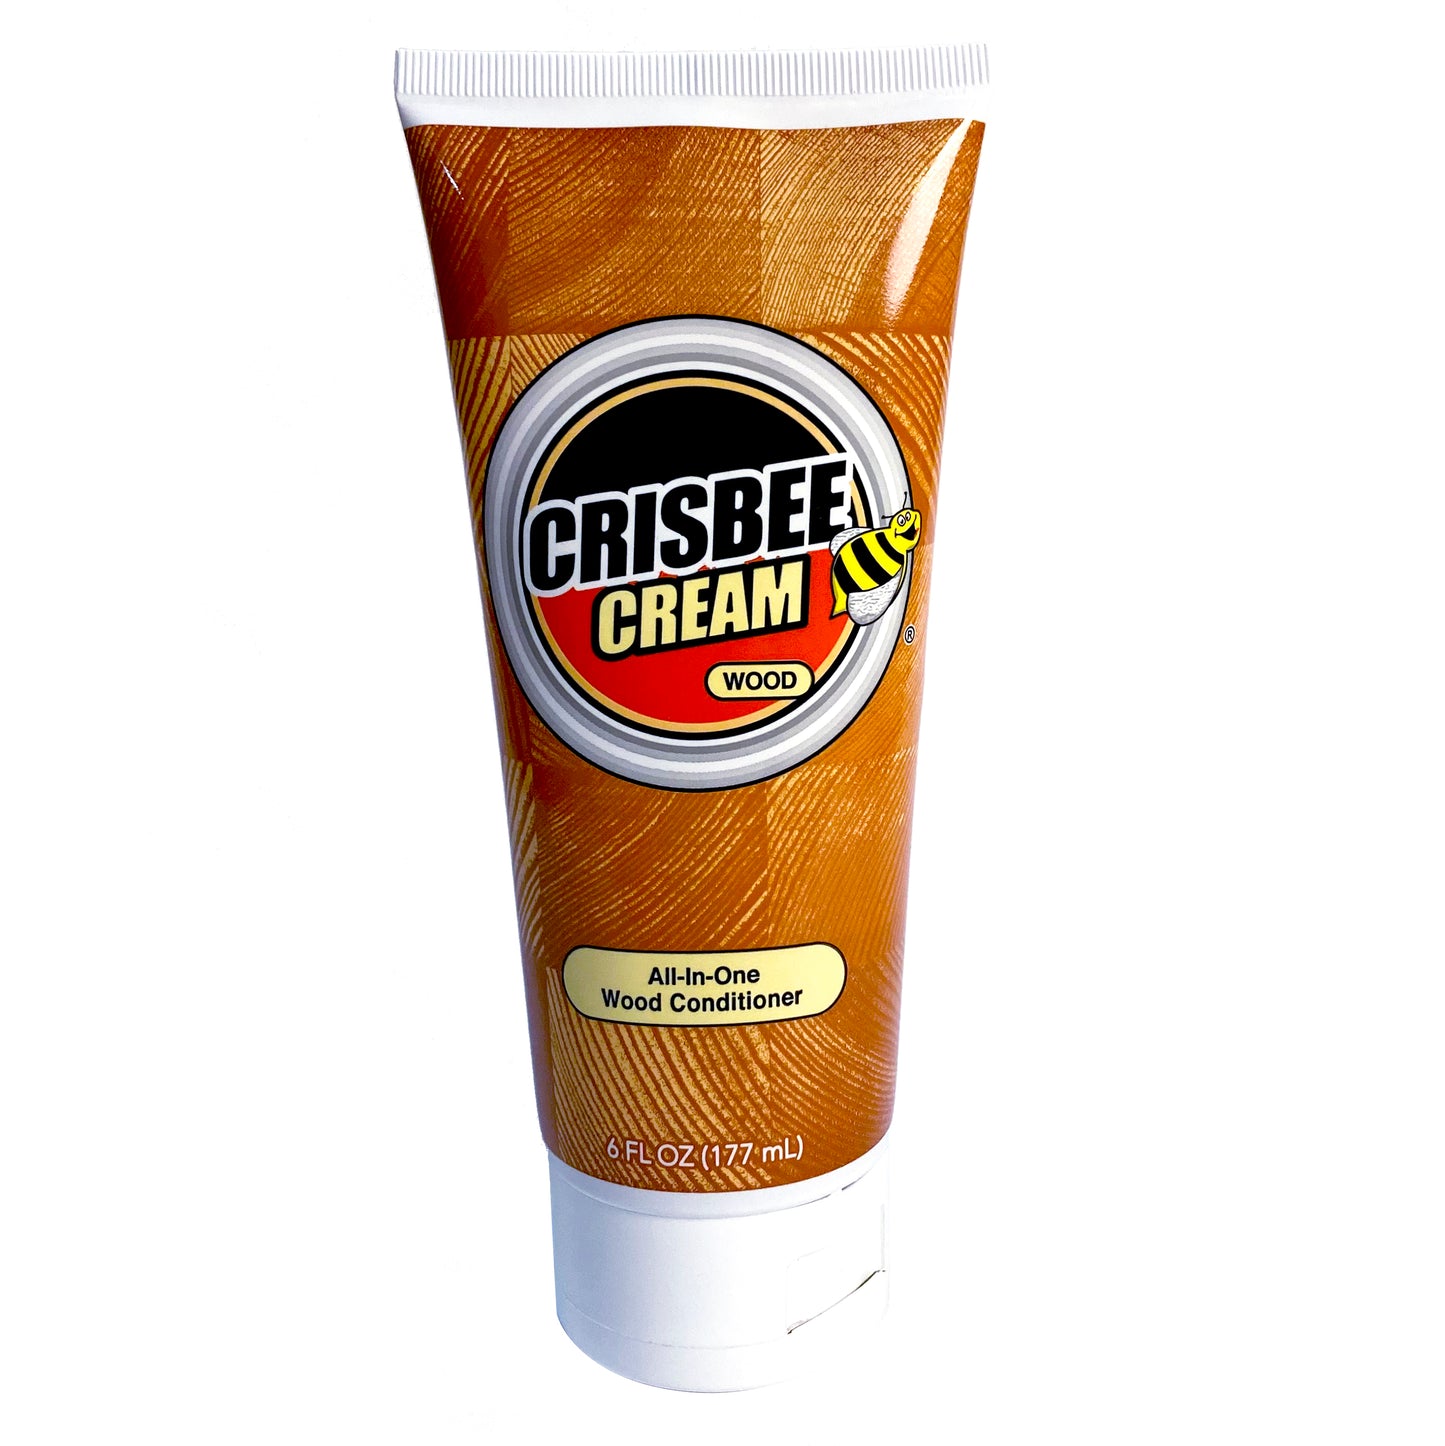 Crisbee Cream Wood - All in one wood conditioner front